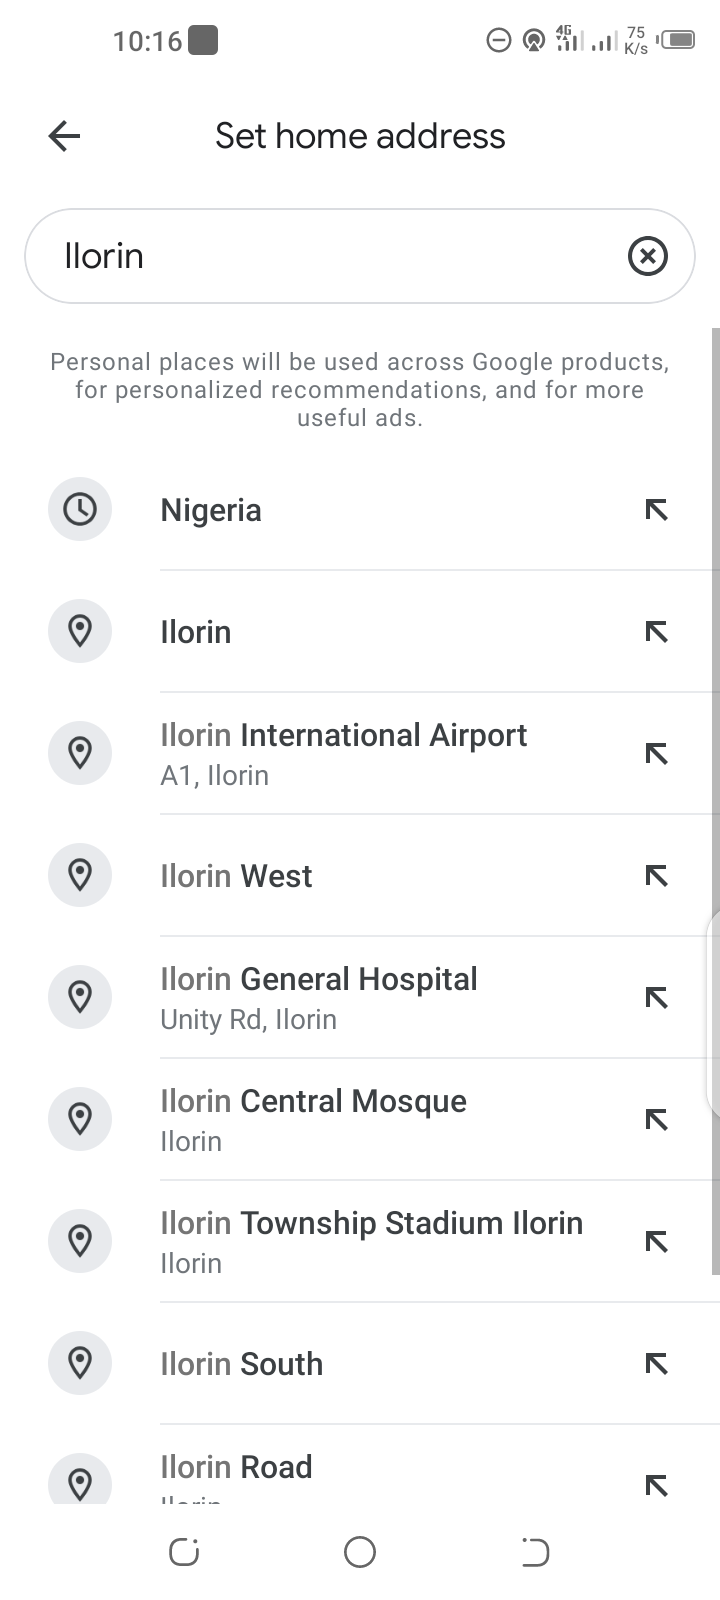 Type your chosen location in the address bar and select it from the options